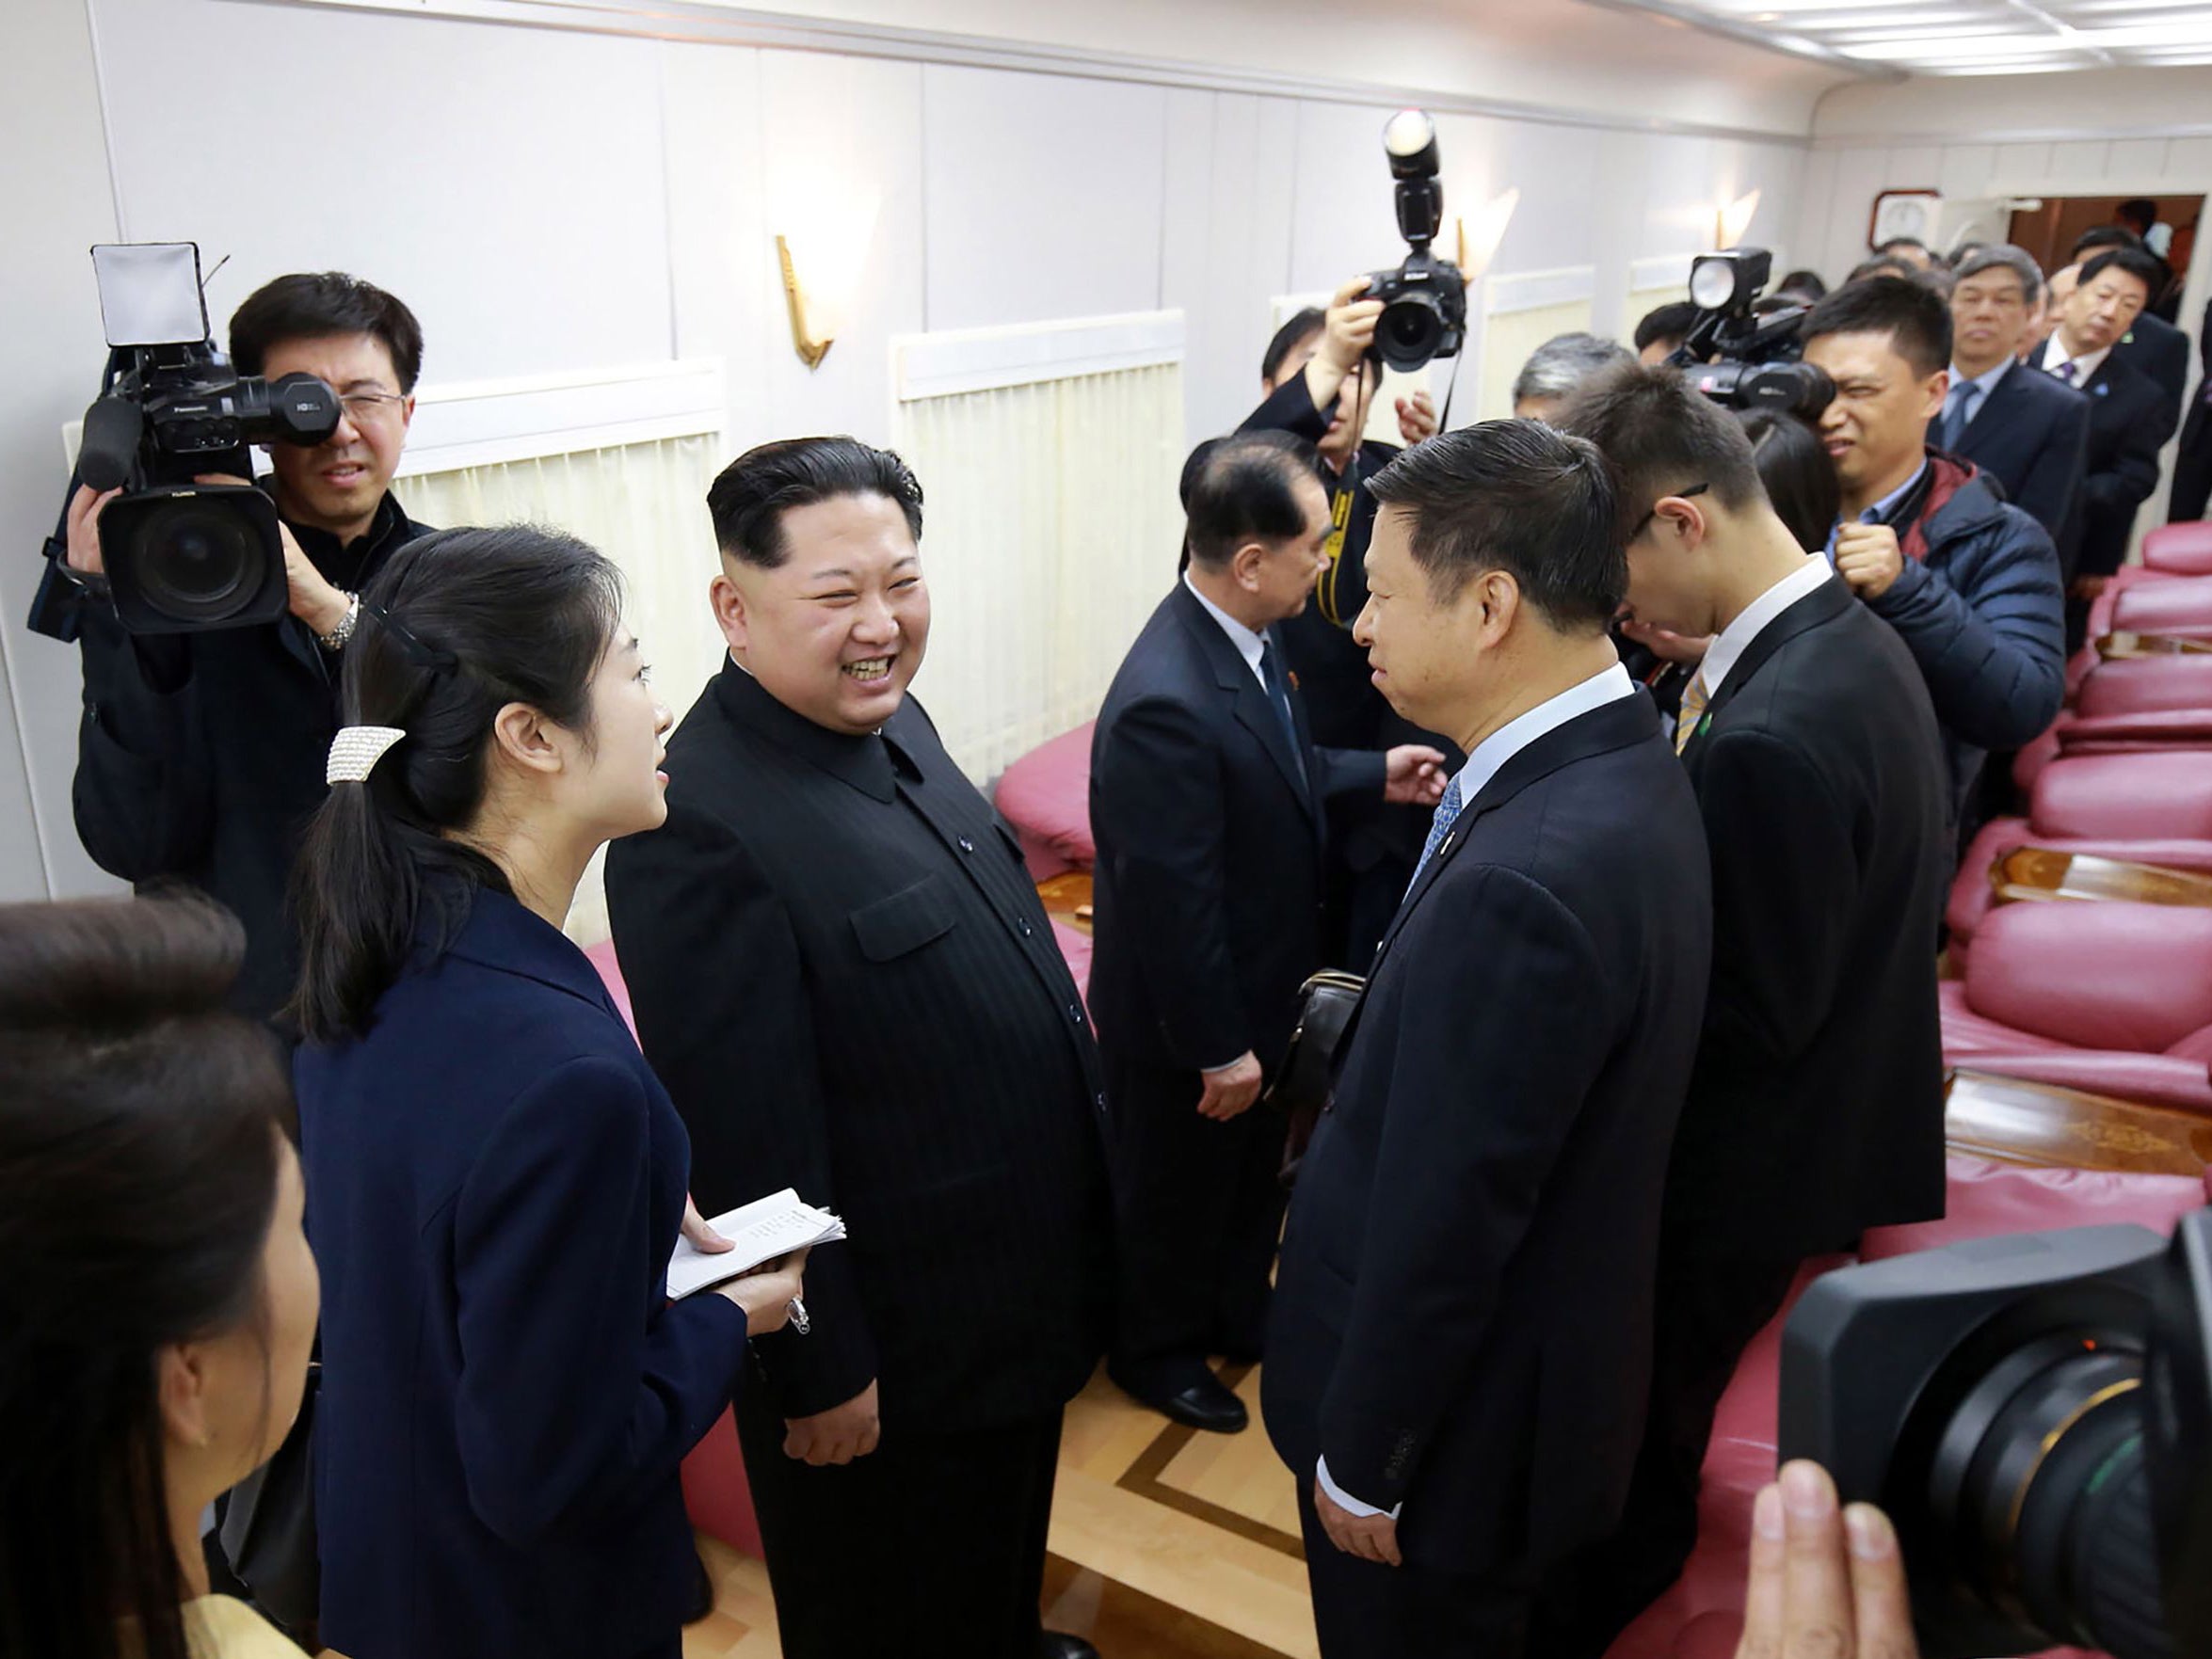 Kim Jong-un meets Chinese officials aboard his train in this photo released by North Korea's state news agency